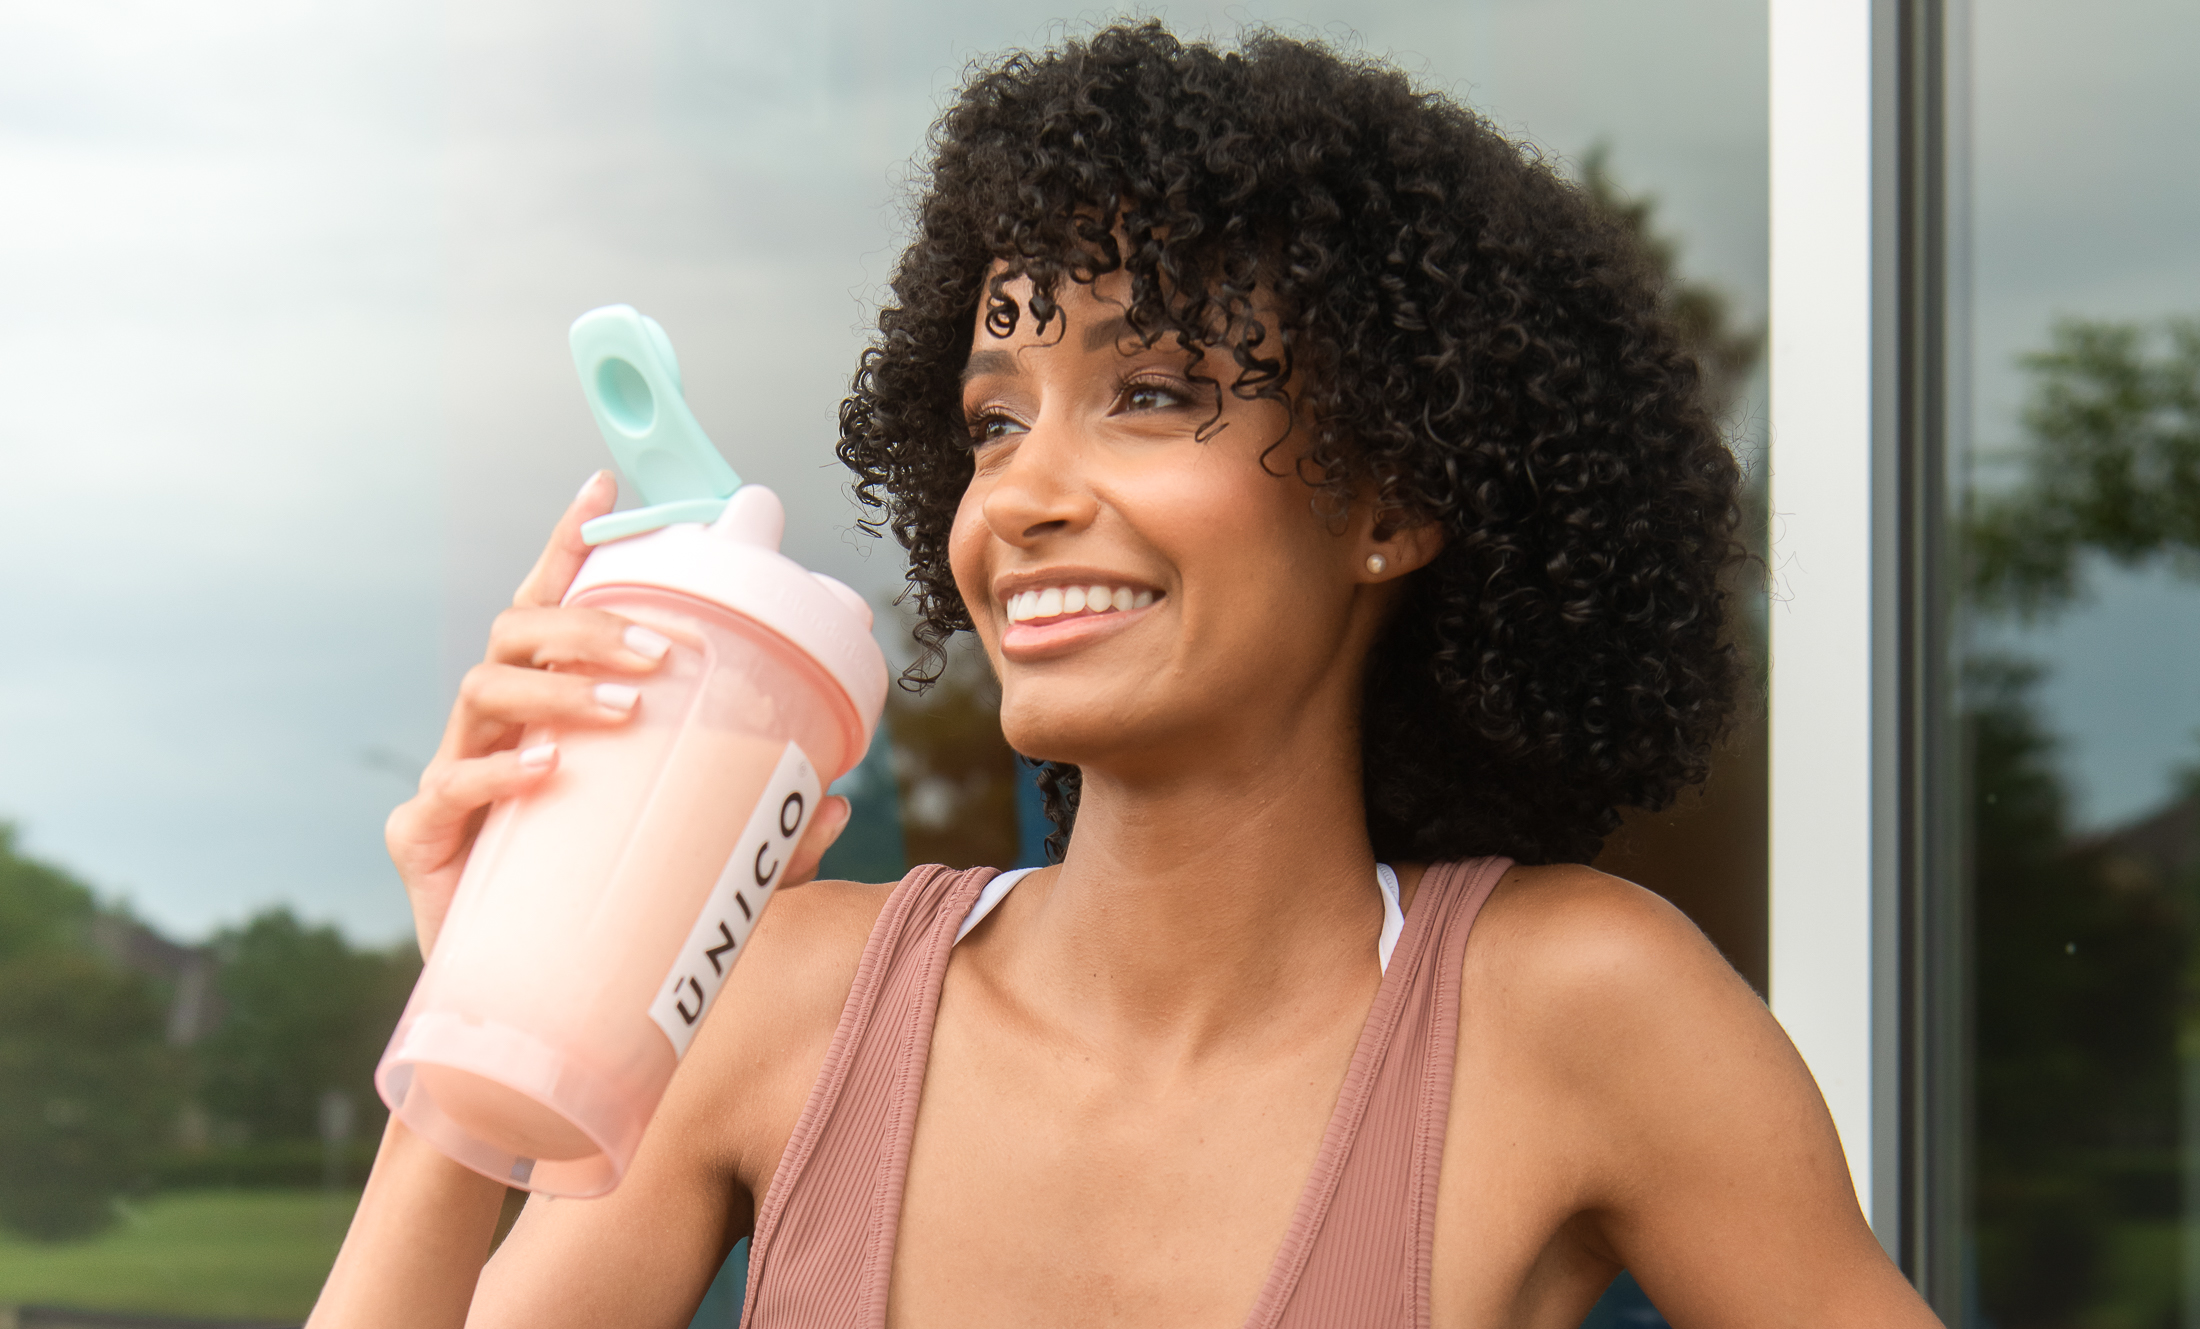 How to Drink Protein Shakes For Weight Loss